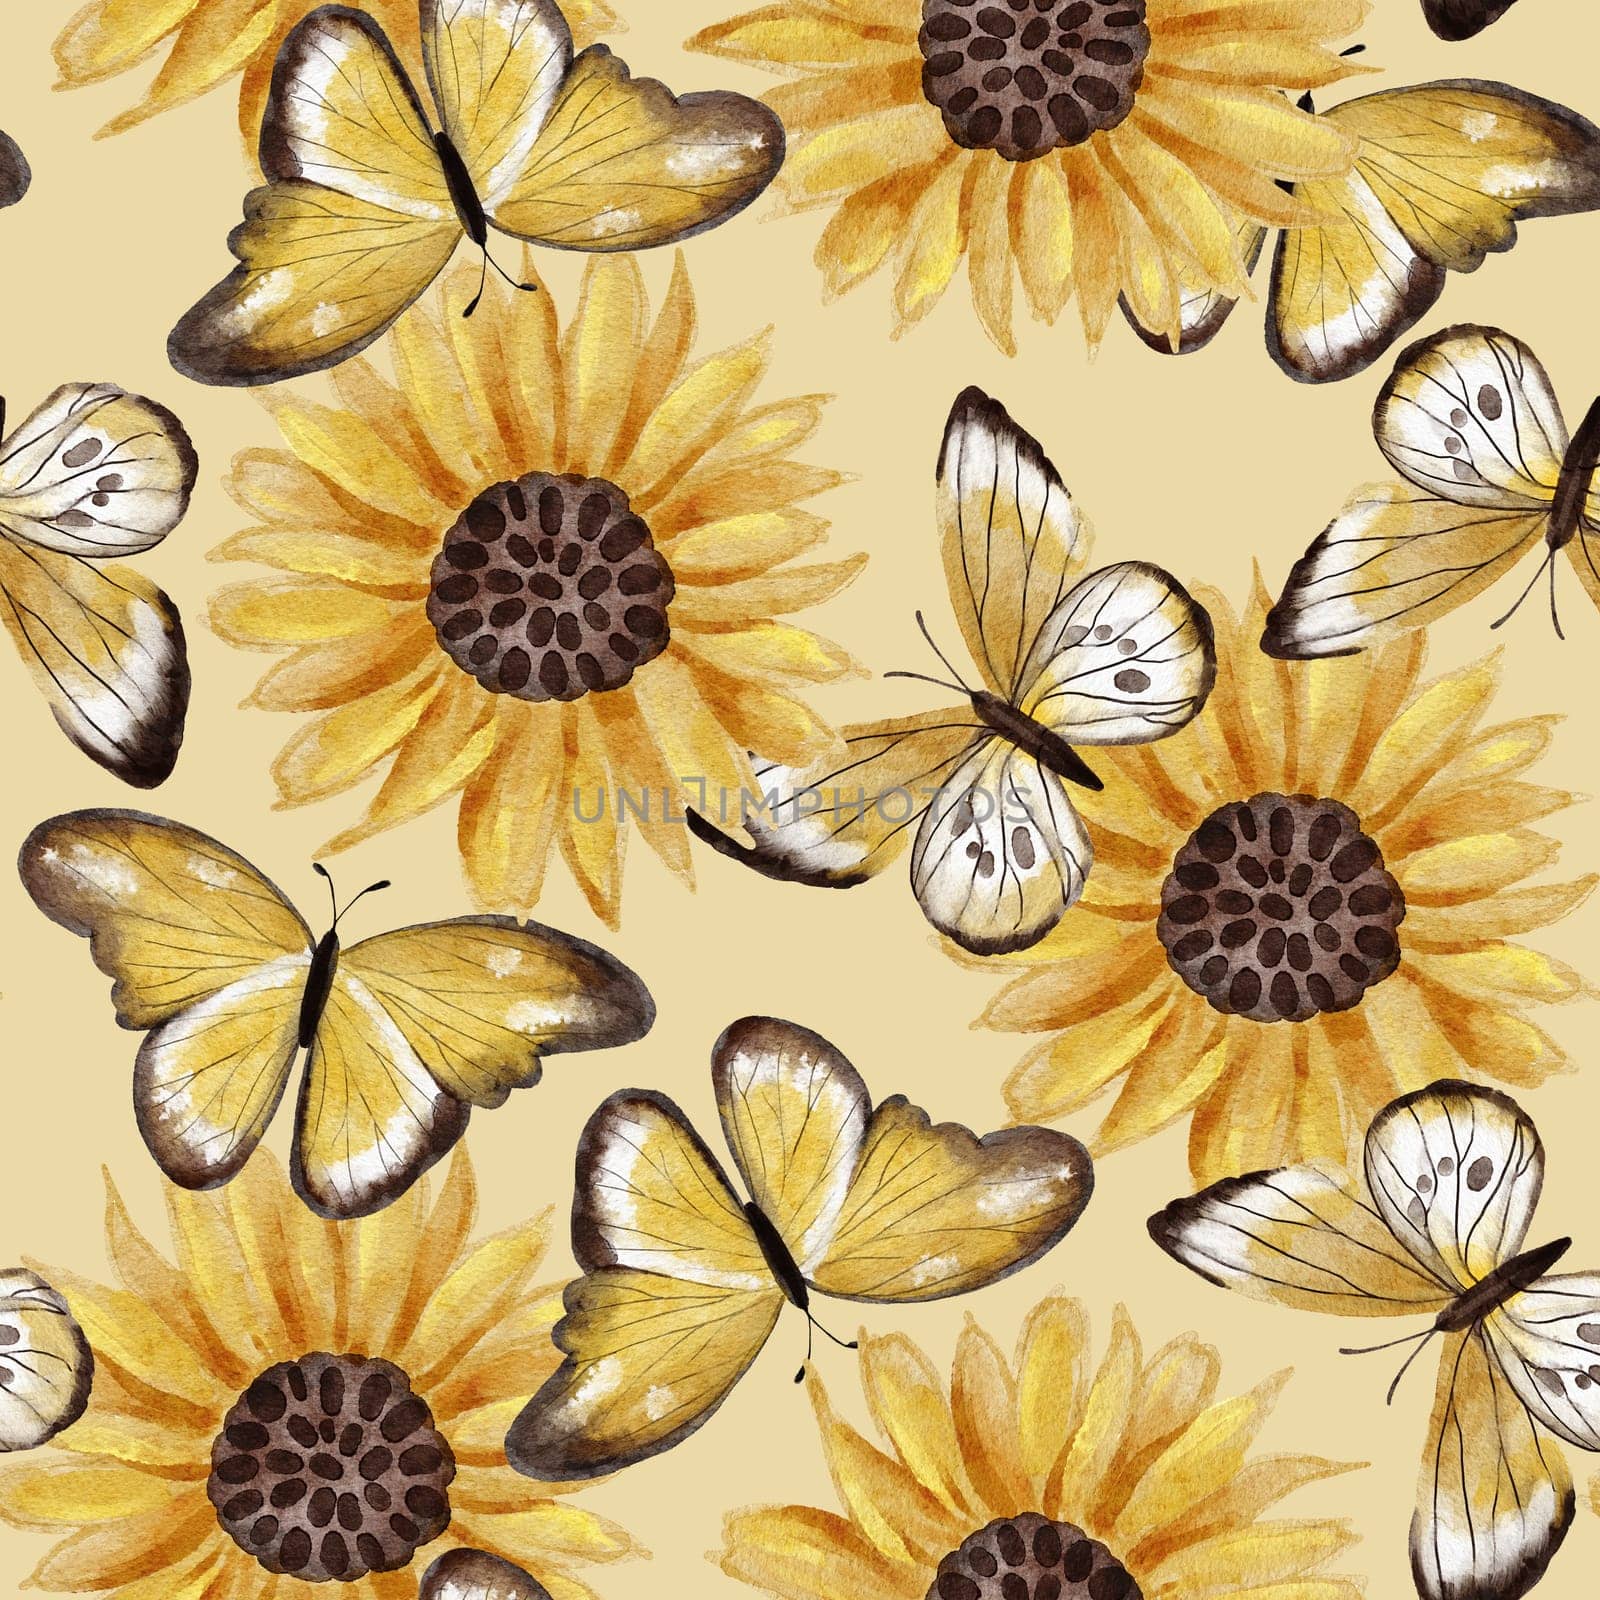 Watercolor seamless hand drawn pattern with realistic summer natural sunflowers flowers butterfly insect. Bright vibrant summer floral background. Retro decor, blooming nature. Beige textile wrapping paper